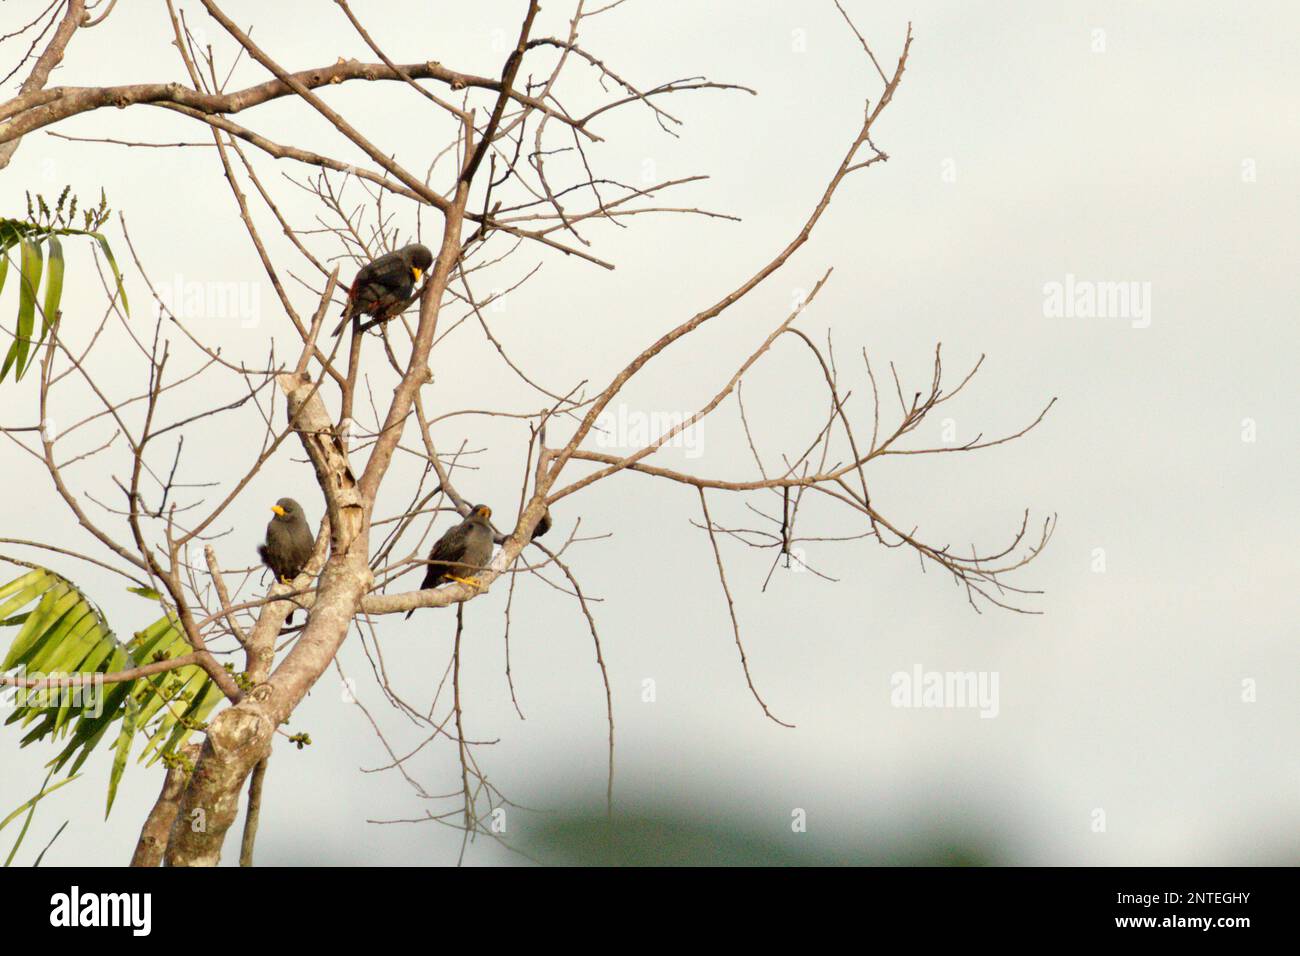 A flock of grosbeak starling (Scissirostrum dubium), a Sulawesi endemic starling, on deciduous tree in a forested area near Mount Tangkoko and Duasudara in Bitung, North Sulawesi, Indonesia. Stock Photo